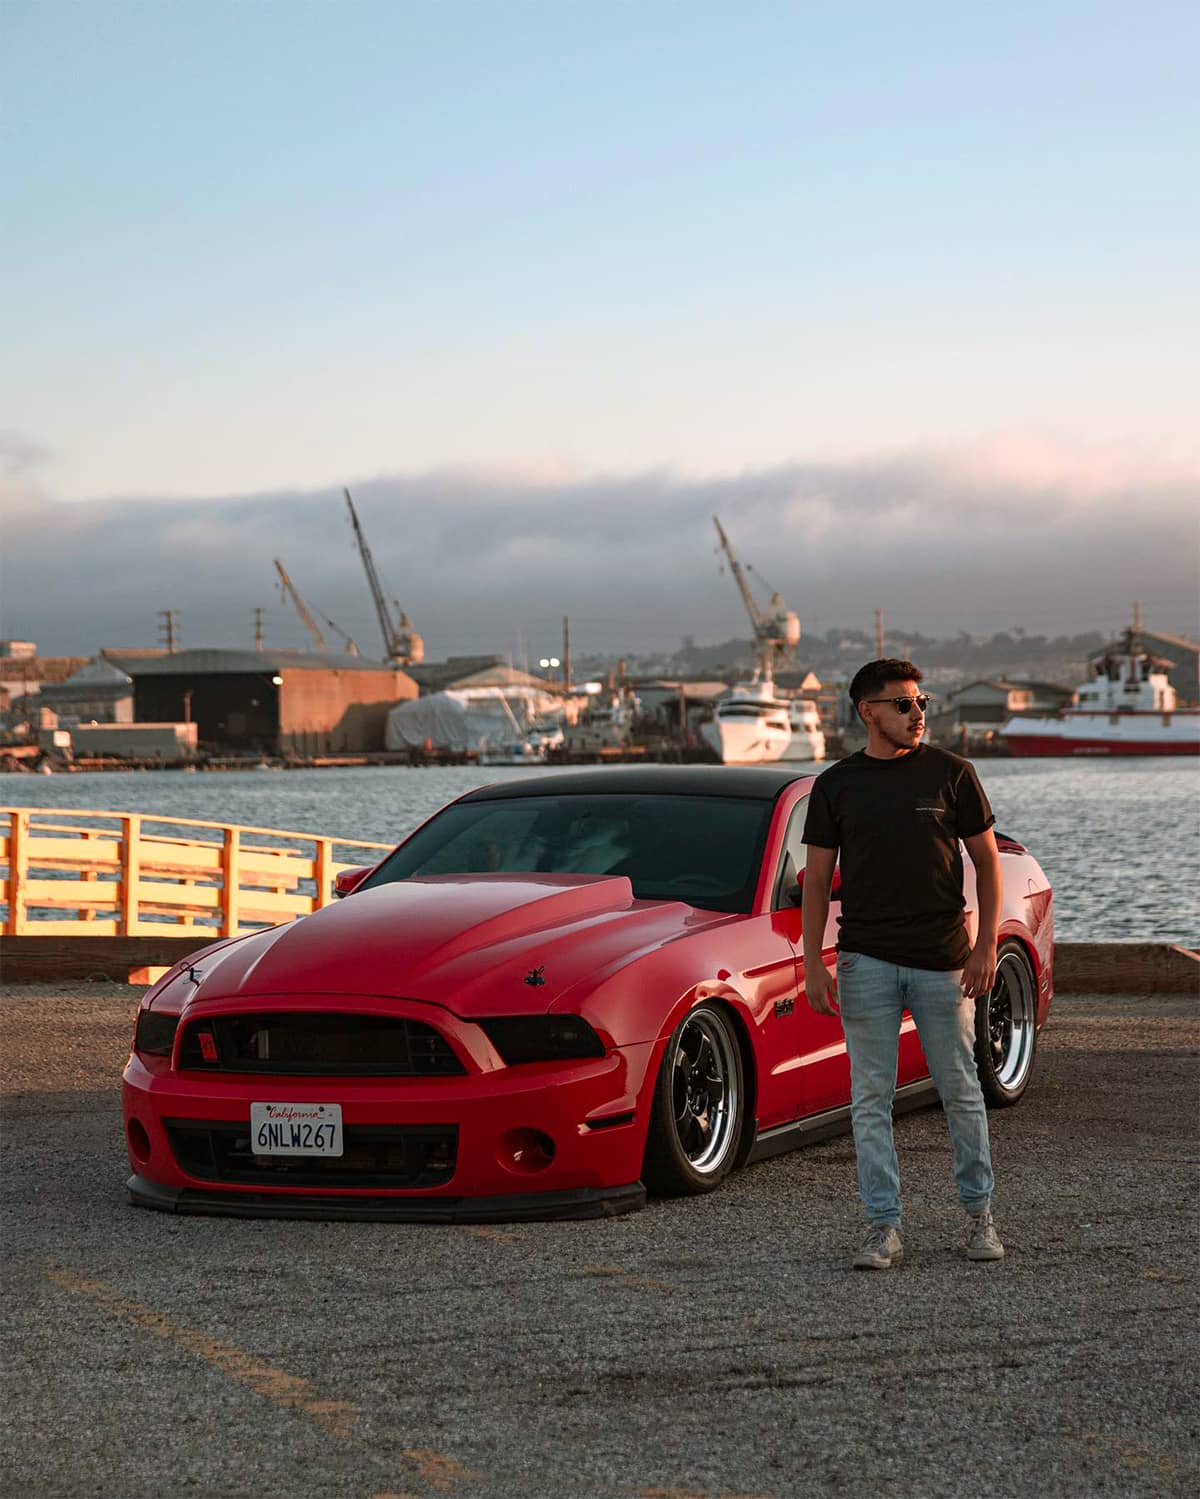 Slammed Ford Mustang GT 5.0 with Airlift air suspension red with black headlight covers